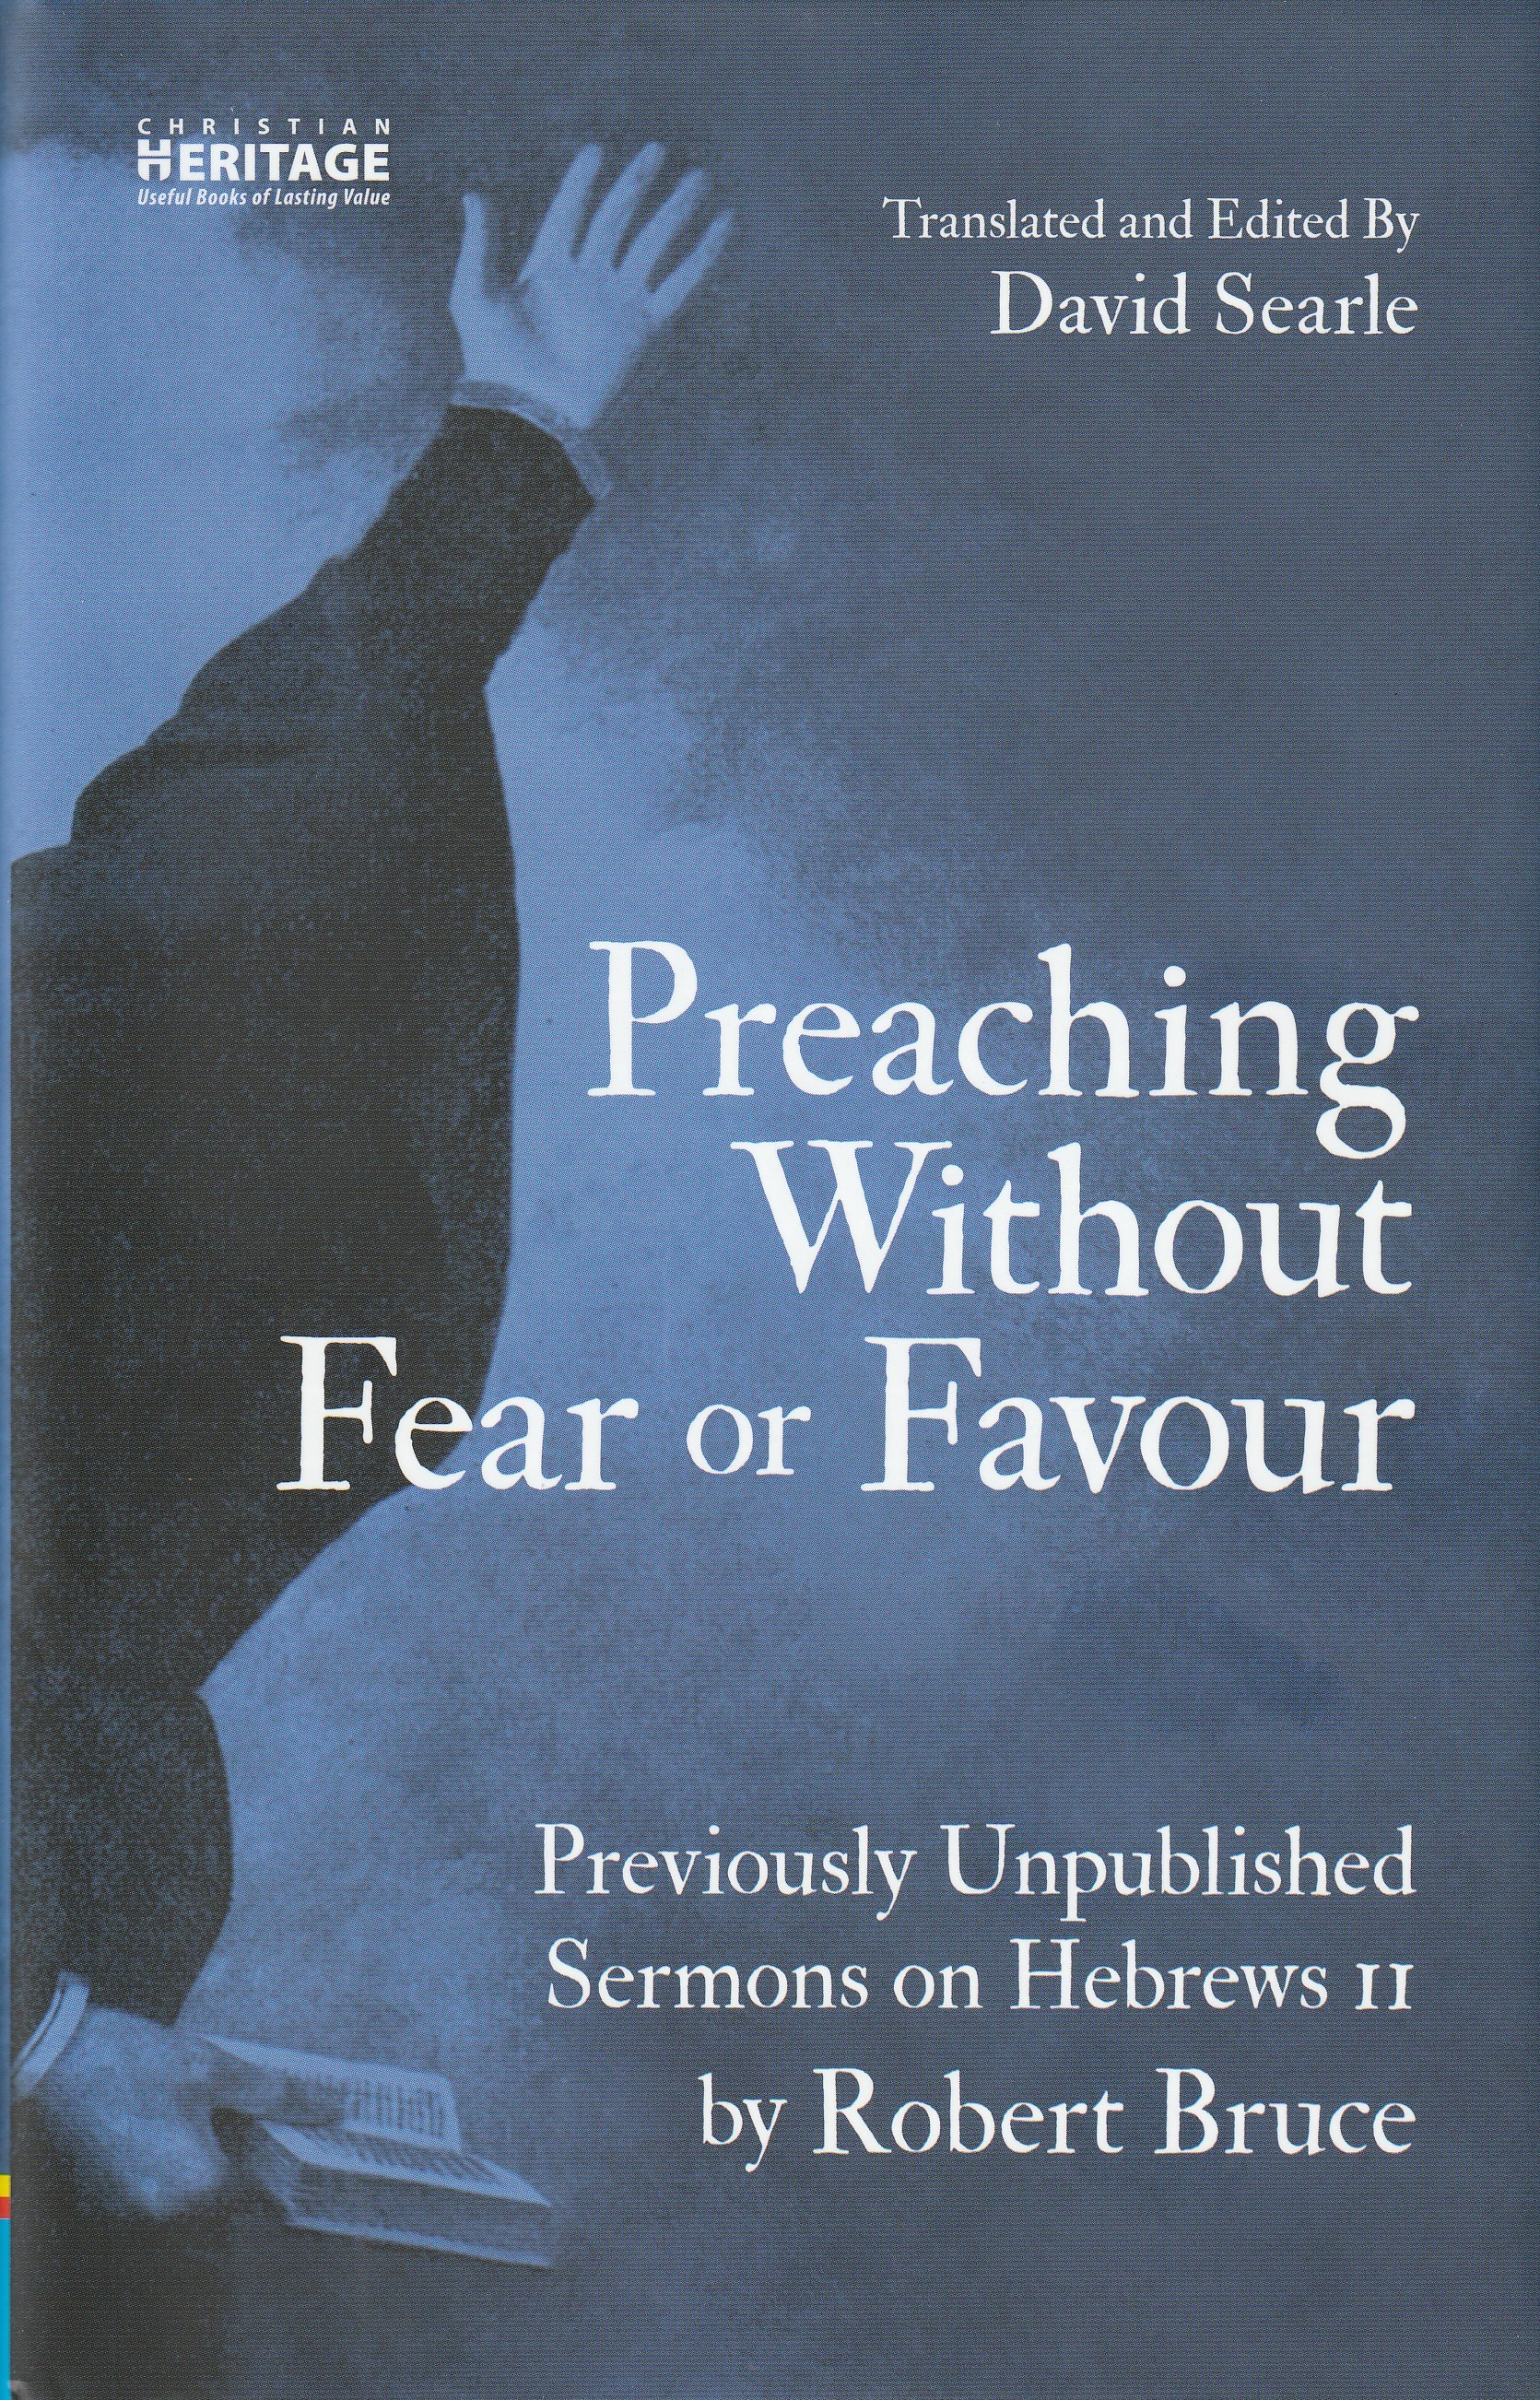 Preaching Without Fear and Favour: Sermons on Hebrews 11